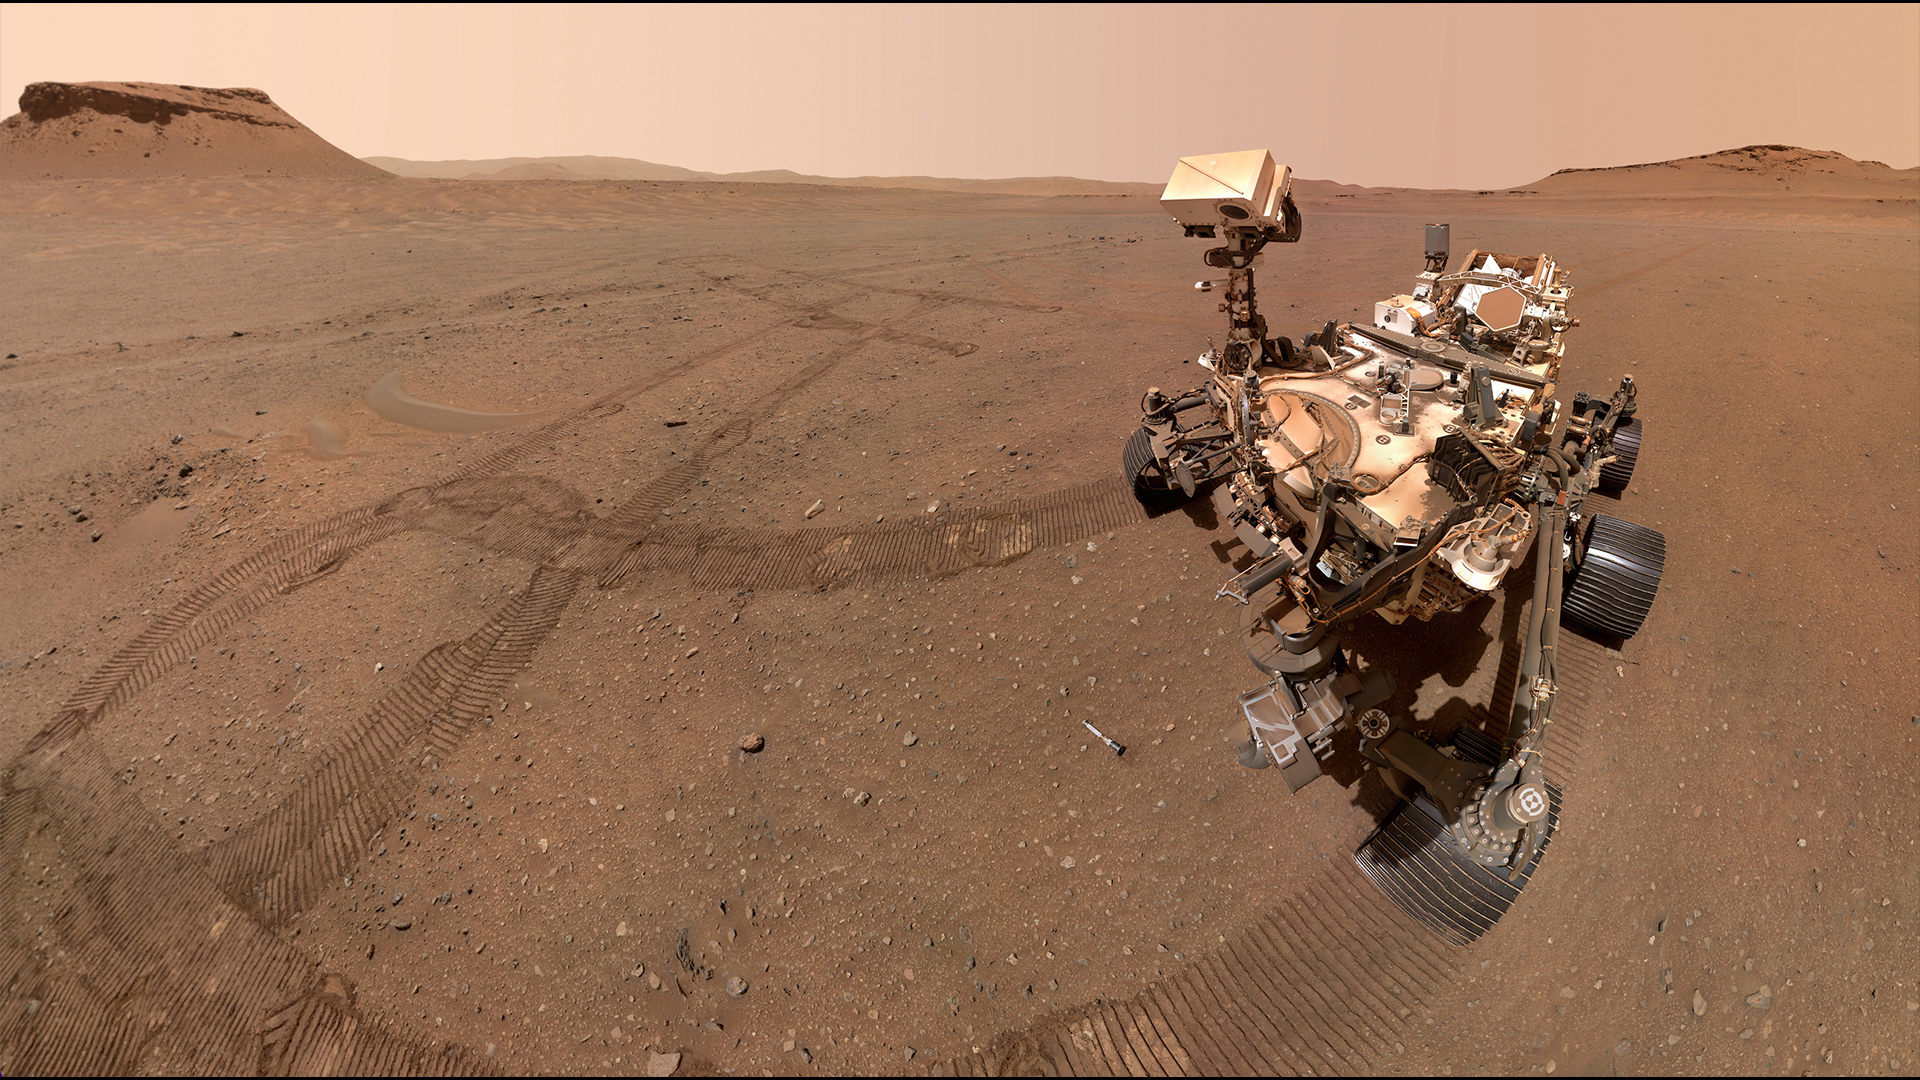 NASA's Perseverance Mars rover took this selfie looking down at one of 10 sample tubes deposited at the sample depot it created in an area nicknamed Three Forks. This image was taken by the WATSON camera on the rover’s robotic arm on Jan. 20, 2023, the 684th Martian day, or sol, of the mission.